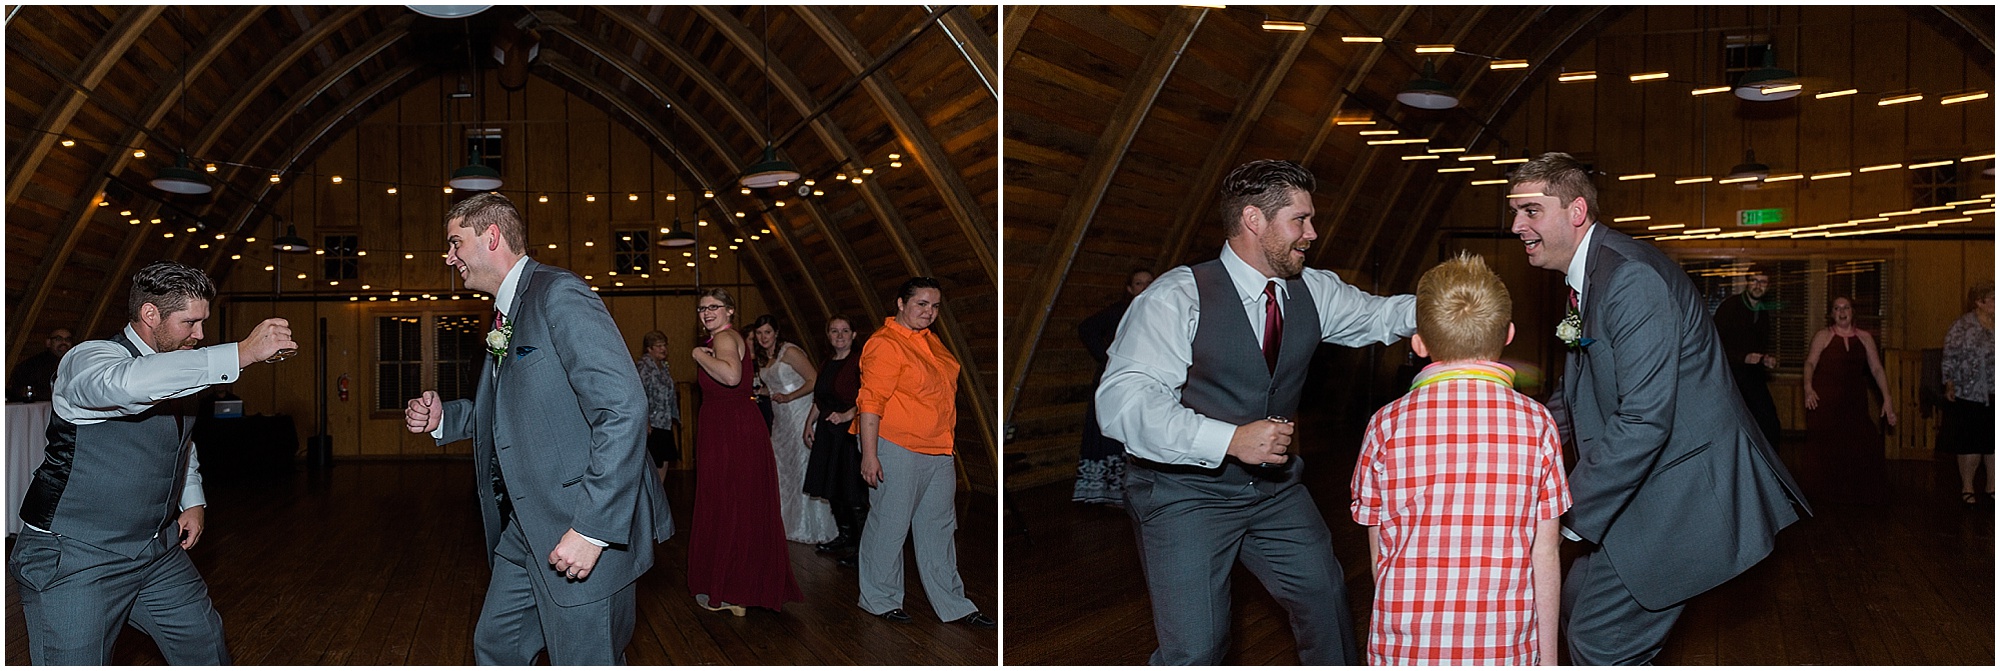 The dance party begins upstairs in the gorgeous hardwood interior of this Hollinshead Barn fall wedding in Bend, OR. | Erica Swantek Photography